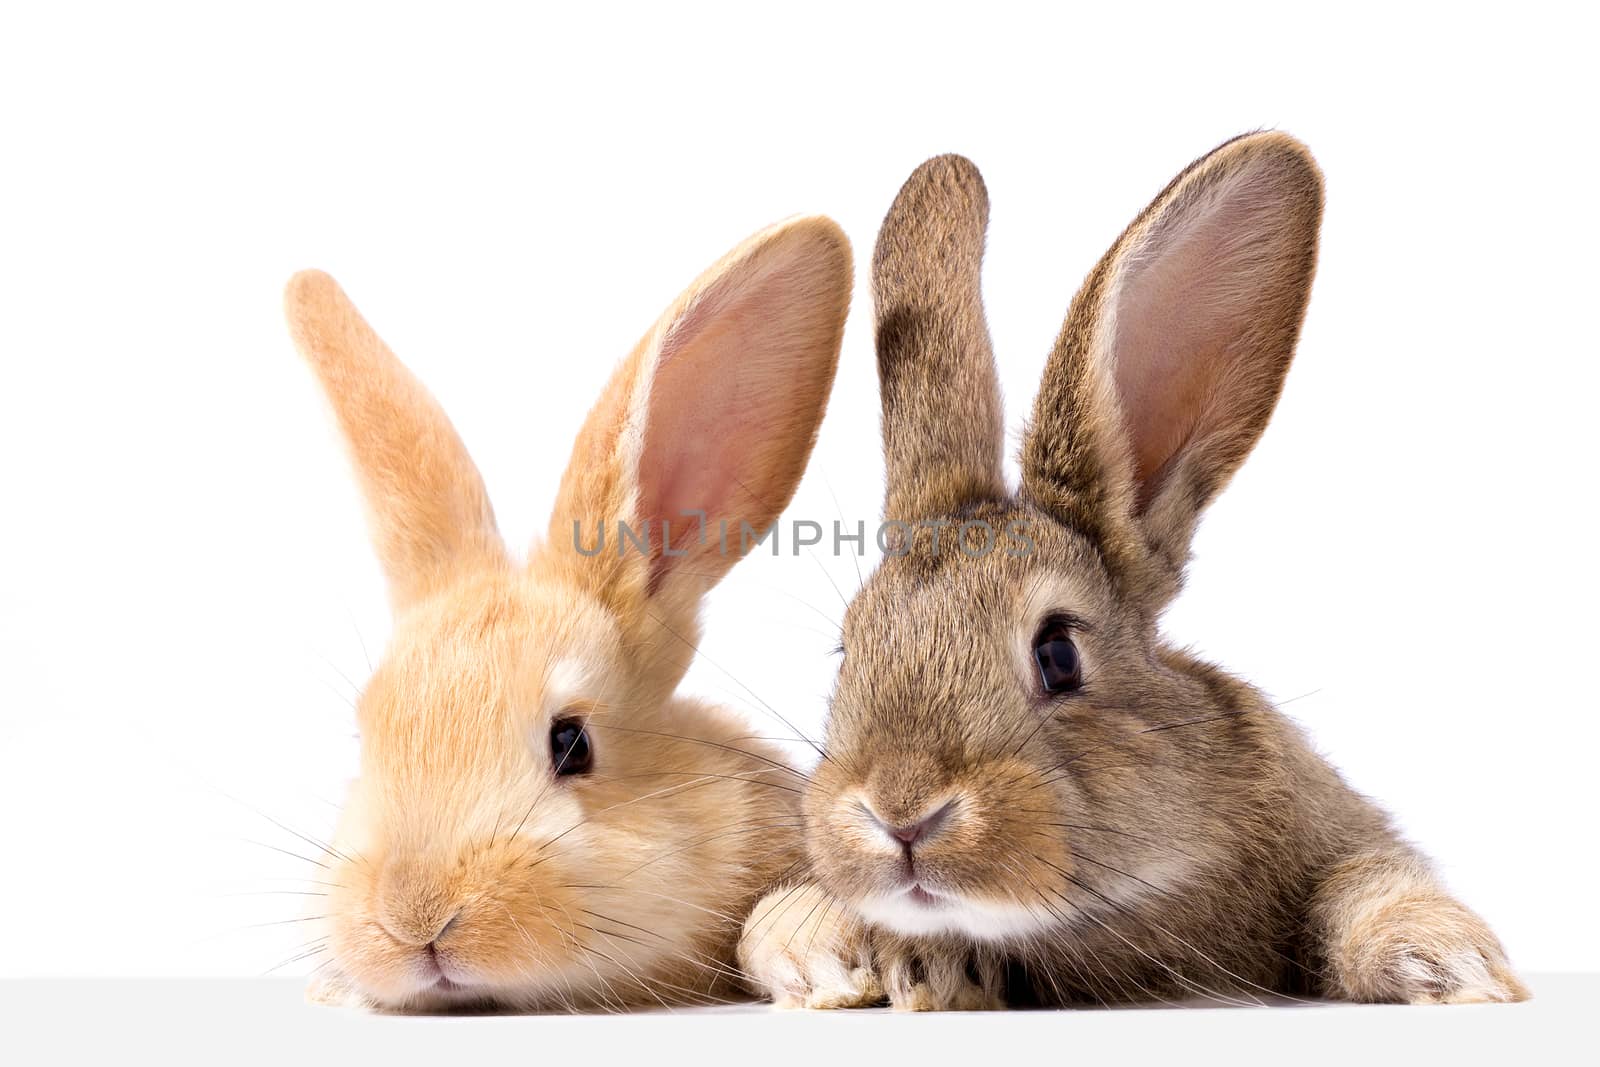 two fluffy bunnies look at the signboard. Isolated on white background Easter Bunny. Red and gray rabbit peeking. Rabbit ears